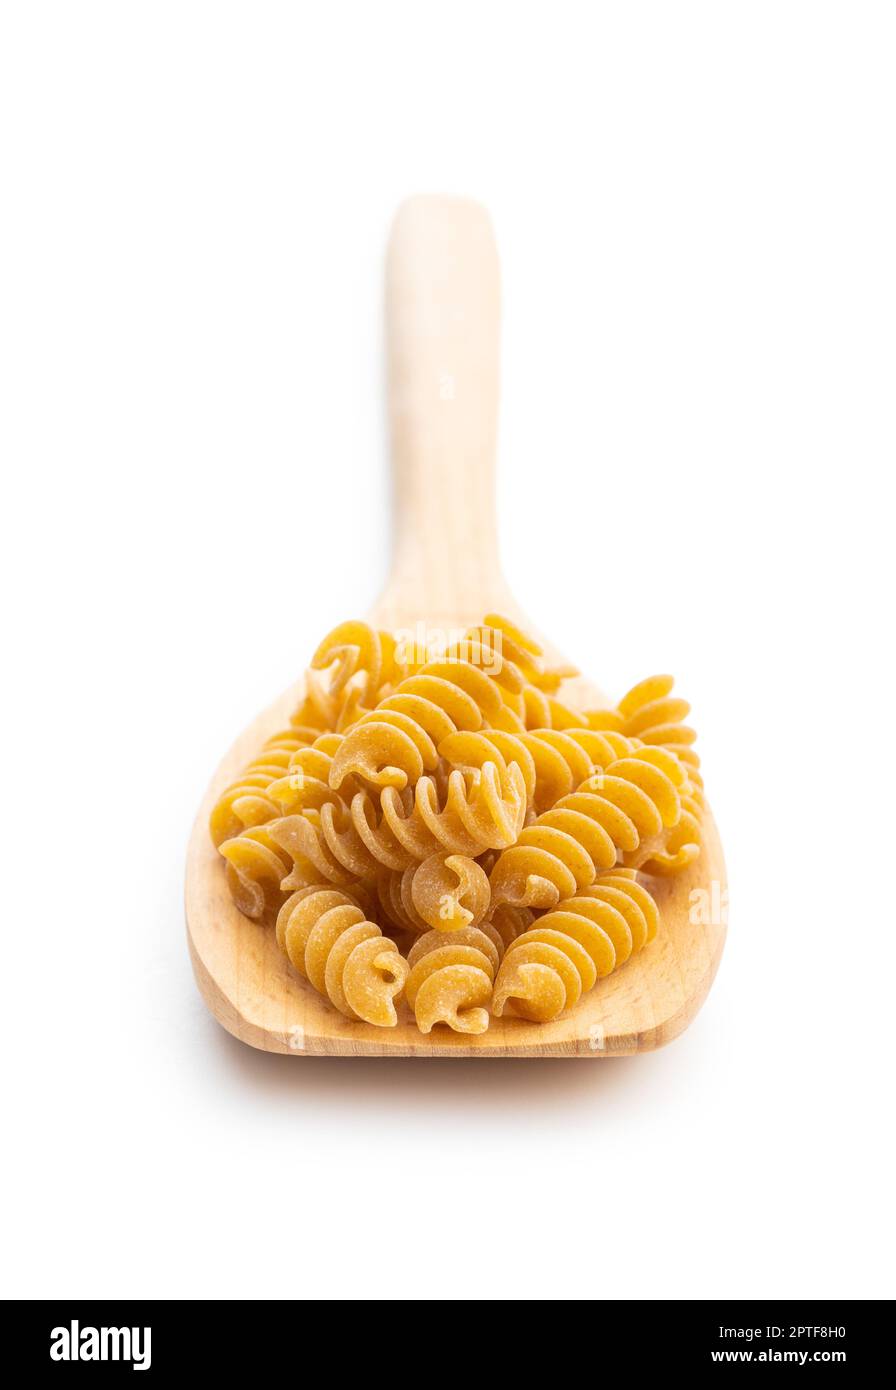 Uncooked whole grain pasta isolated on white background. Raw pasta on the spoon. Stock Photo